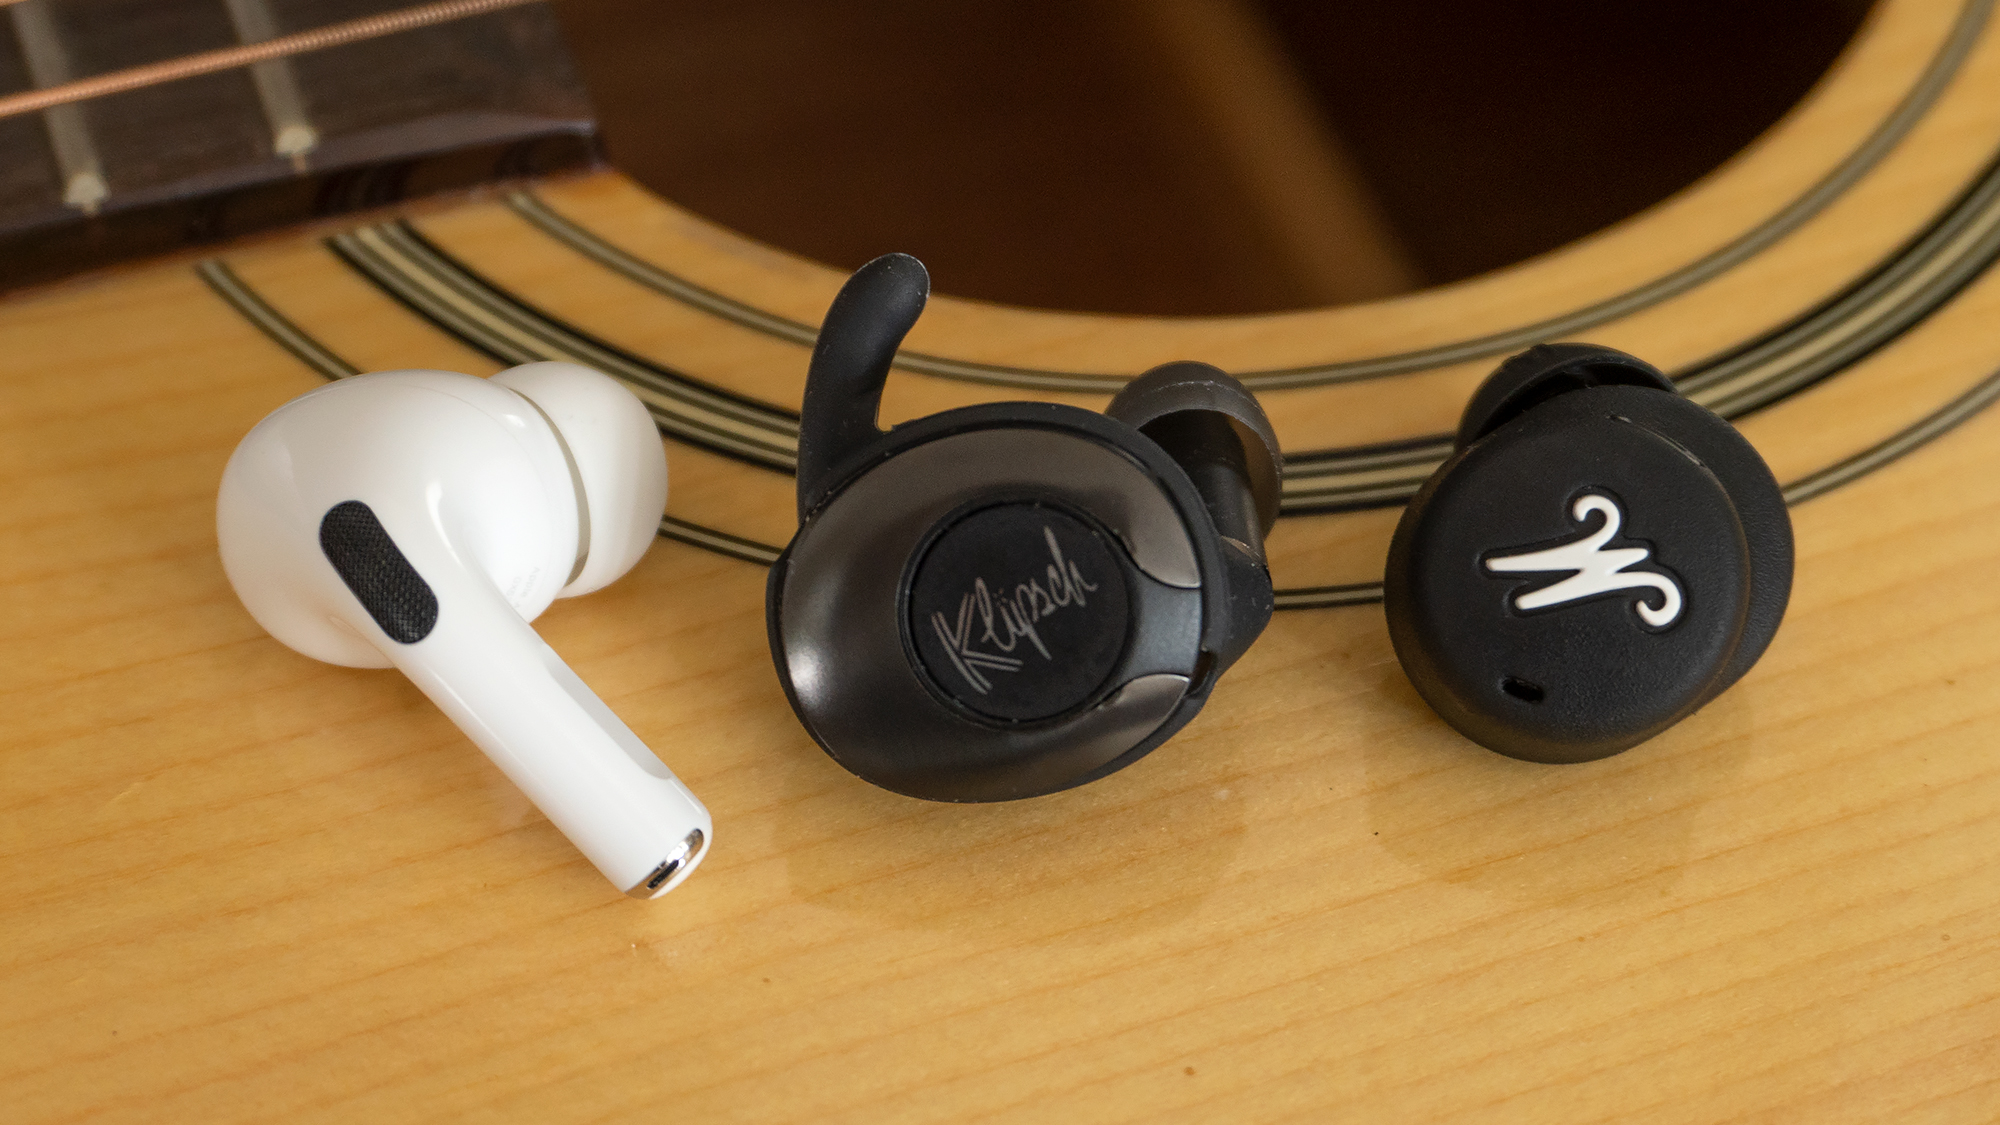 The Marshall Mode II earbuds are smaller than the AirPods Pro and the Klipsch T5 II True Wireless Sport, but as a result they sound like their drivers are also on the small side. (Photo: Andrew Liszewski/Gizmodo)